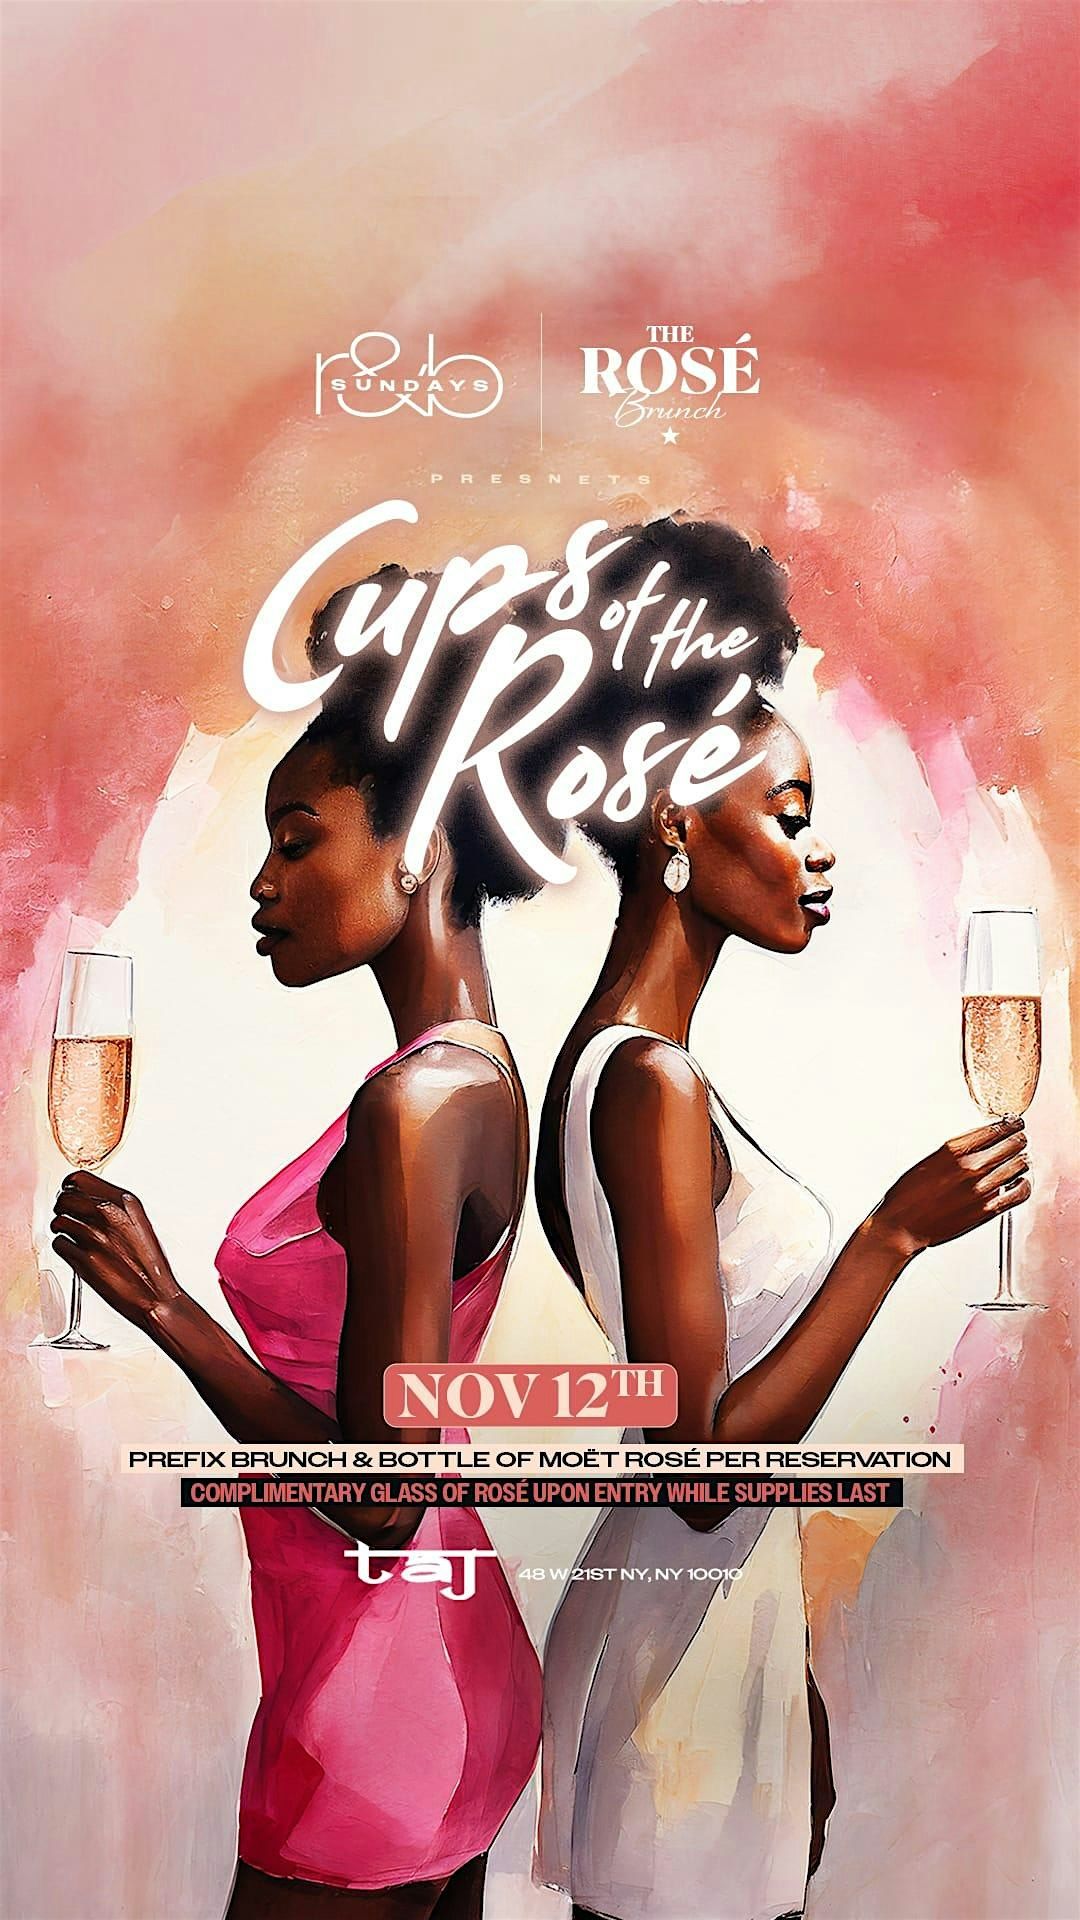 Sun. 11\/12: The #1 R&B Bottomless Brunch & Day Party Experience at TaJ NYC.